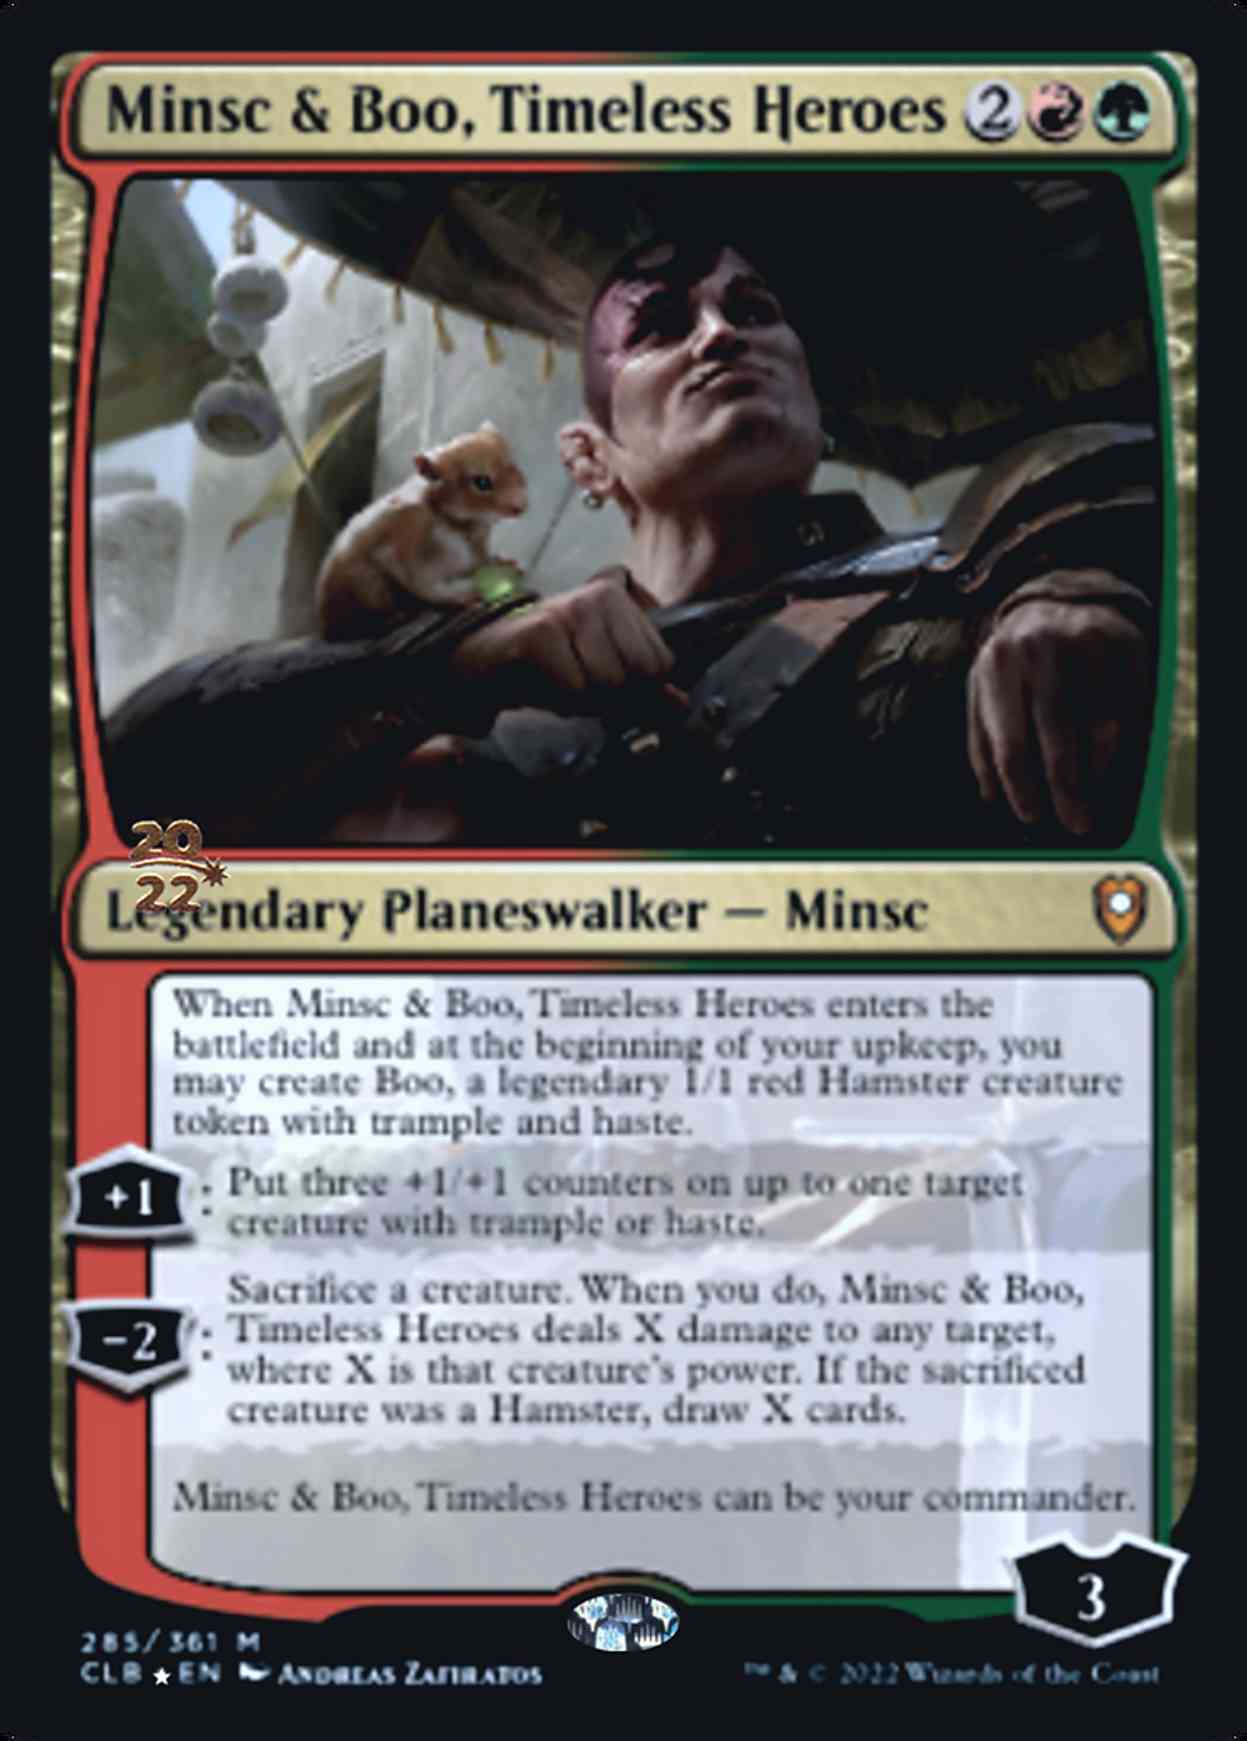 Minsc & Boo, Timeless Heroes magic card front